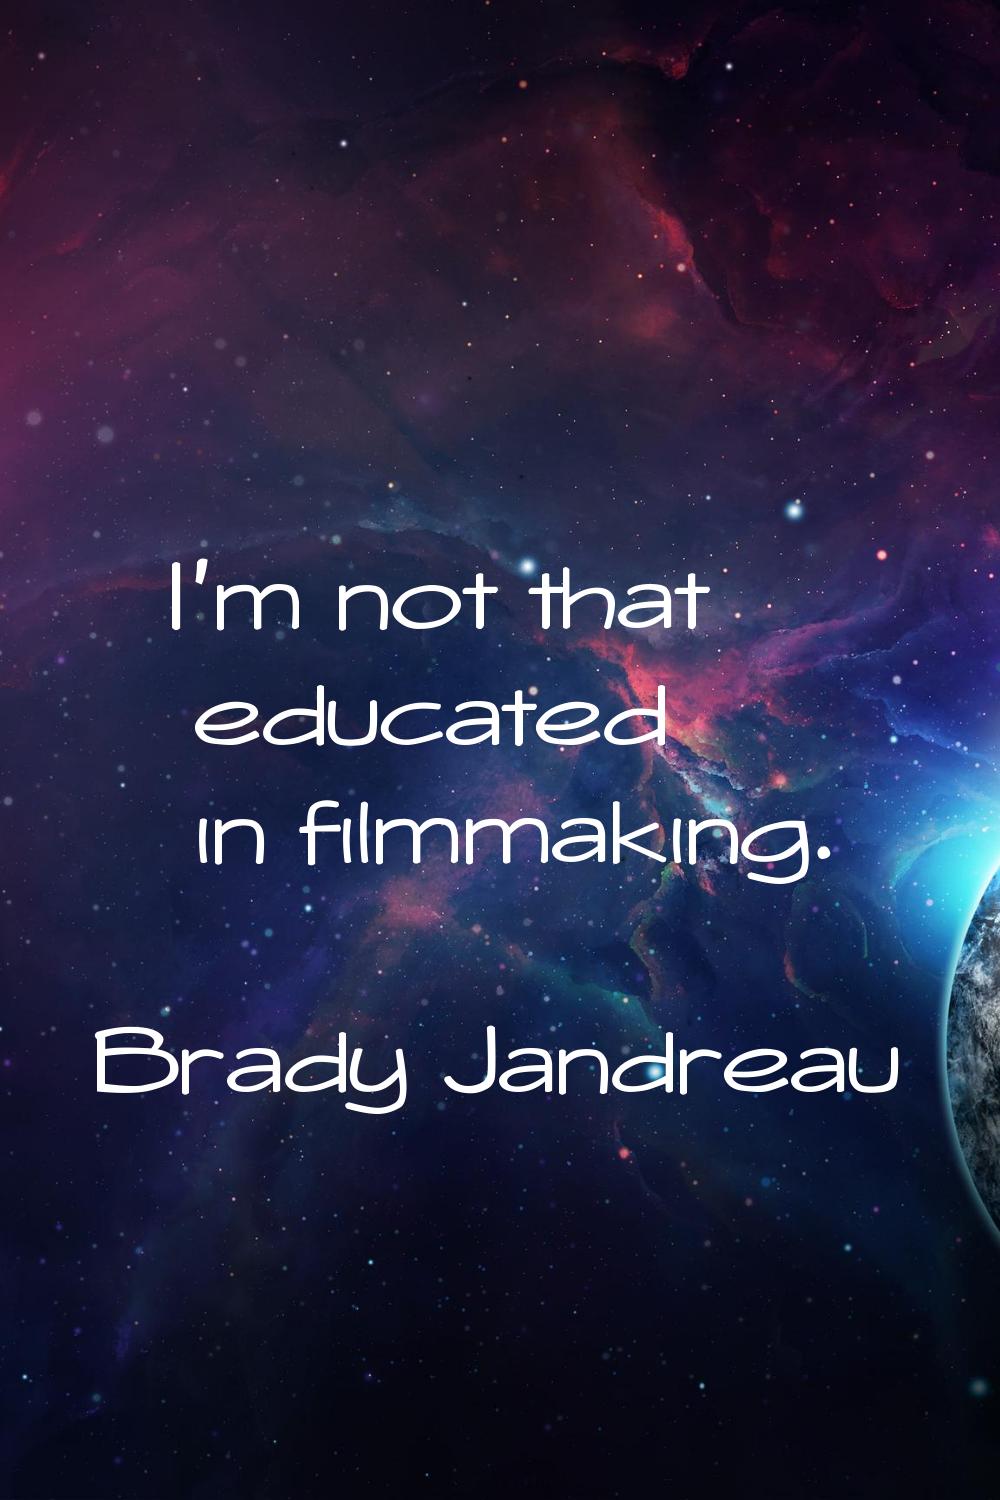 I'm not that educated in filmmaking.